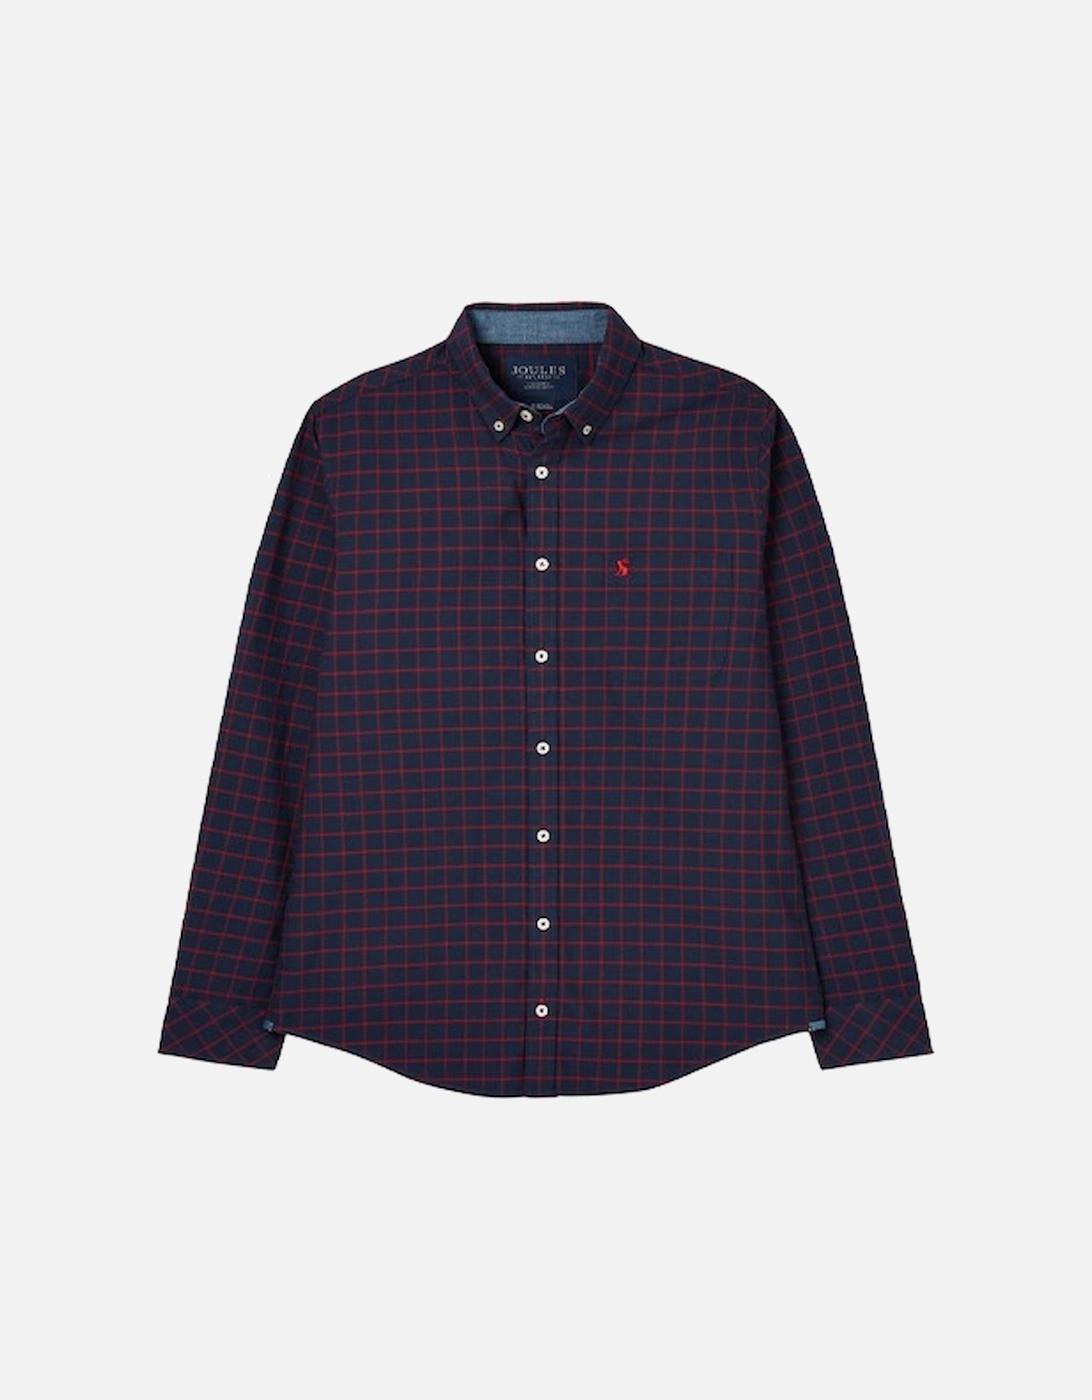 Men's Welford Classic Fit Shirt Navy Red Check